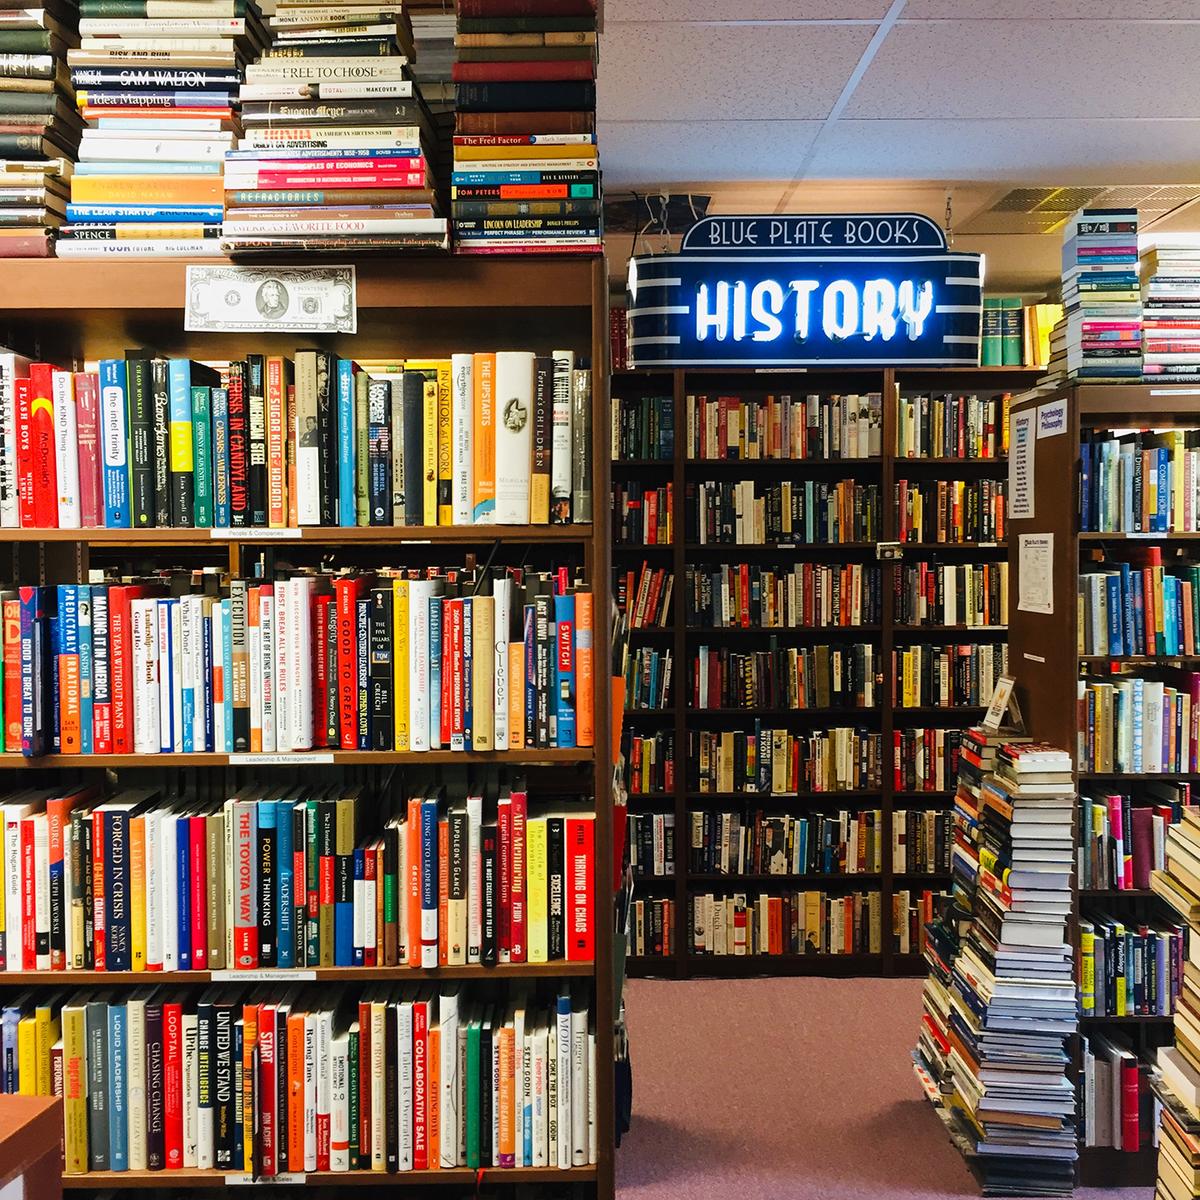 The interior of Blue Plate Books. (Courtesy of Blue Plate Books)